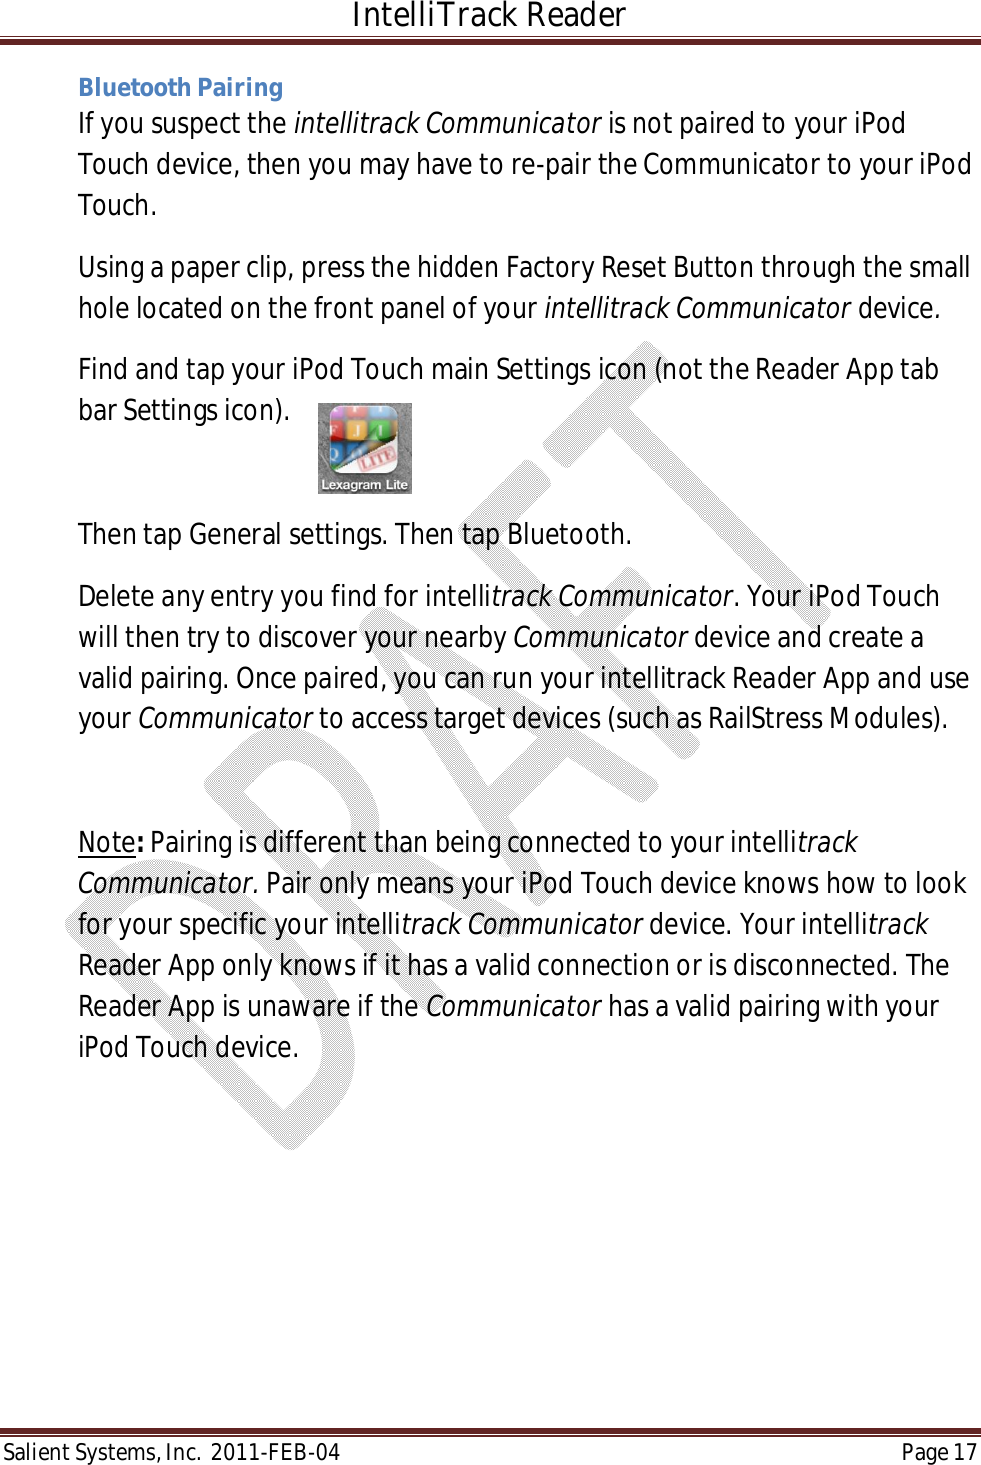 IntelliTrack Reader  Salient Systems, Inc.  2011-FEB-04 Page 17  Bluetooth Pairing If you suspect the intellitrack Communicator is not paired to your iPod Touch device, then you may have to re-pair the Communicator to your iPod Touch.  Using a paper clip, press the hidden Factory Reset Button through the small hole located on the front panel of your intellitrack Communicator device. Find and tap your iPod Touch main Settings icon (not the Reader App tab bar Settings icon).   Then tap General settings. Then tap Bluetooth. Delete any entry you find for intellitrack Communicator. Your iPod Touch will then try to discover your nearby Communicator device and create a valid pairing. Once paired, you can run your intellitrack Reader App and use your Communicator to access target devices (such as RailStress Modules).  Note: Pairing is different than being connected to your intellitrack Communicator. Pair only means your iPod Touch device knows how to look for your specific your intellitrack Communicator device. Your intellitrack Reader App only knows if it has a valid connection or is disconnected. The Reader App is unaware if the Communicator has a valid pairing with your iPod Touch device. 